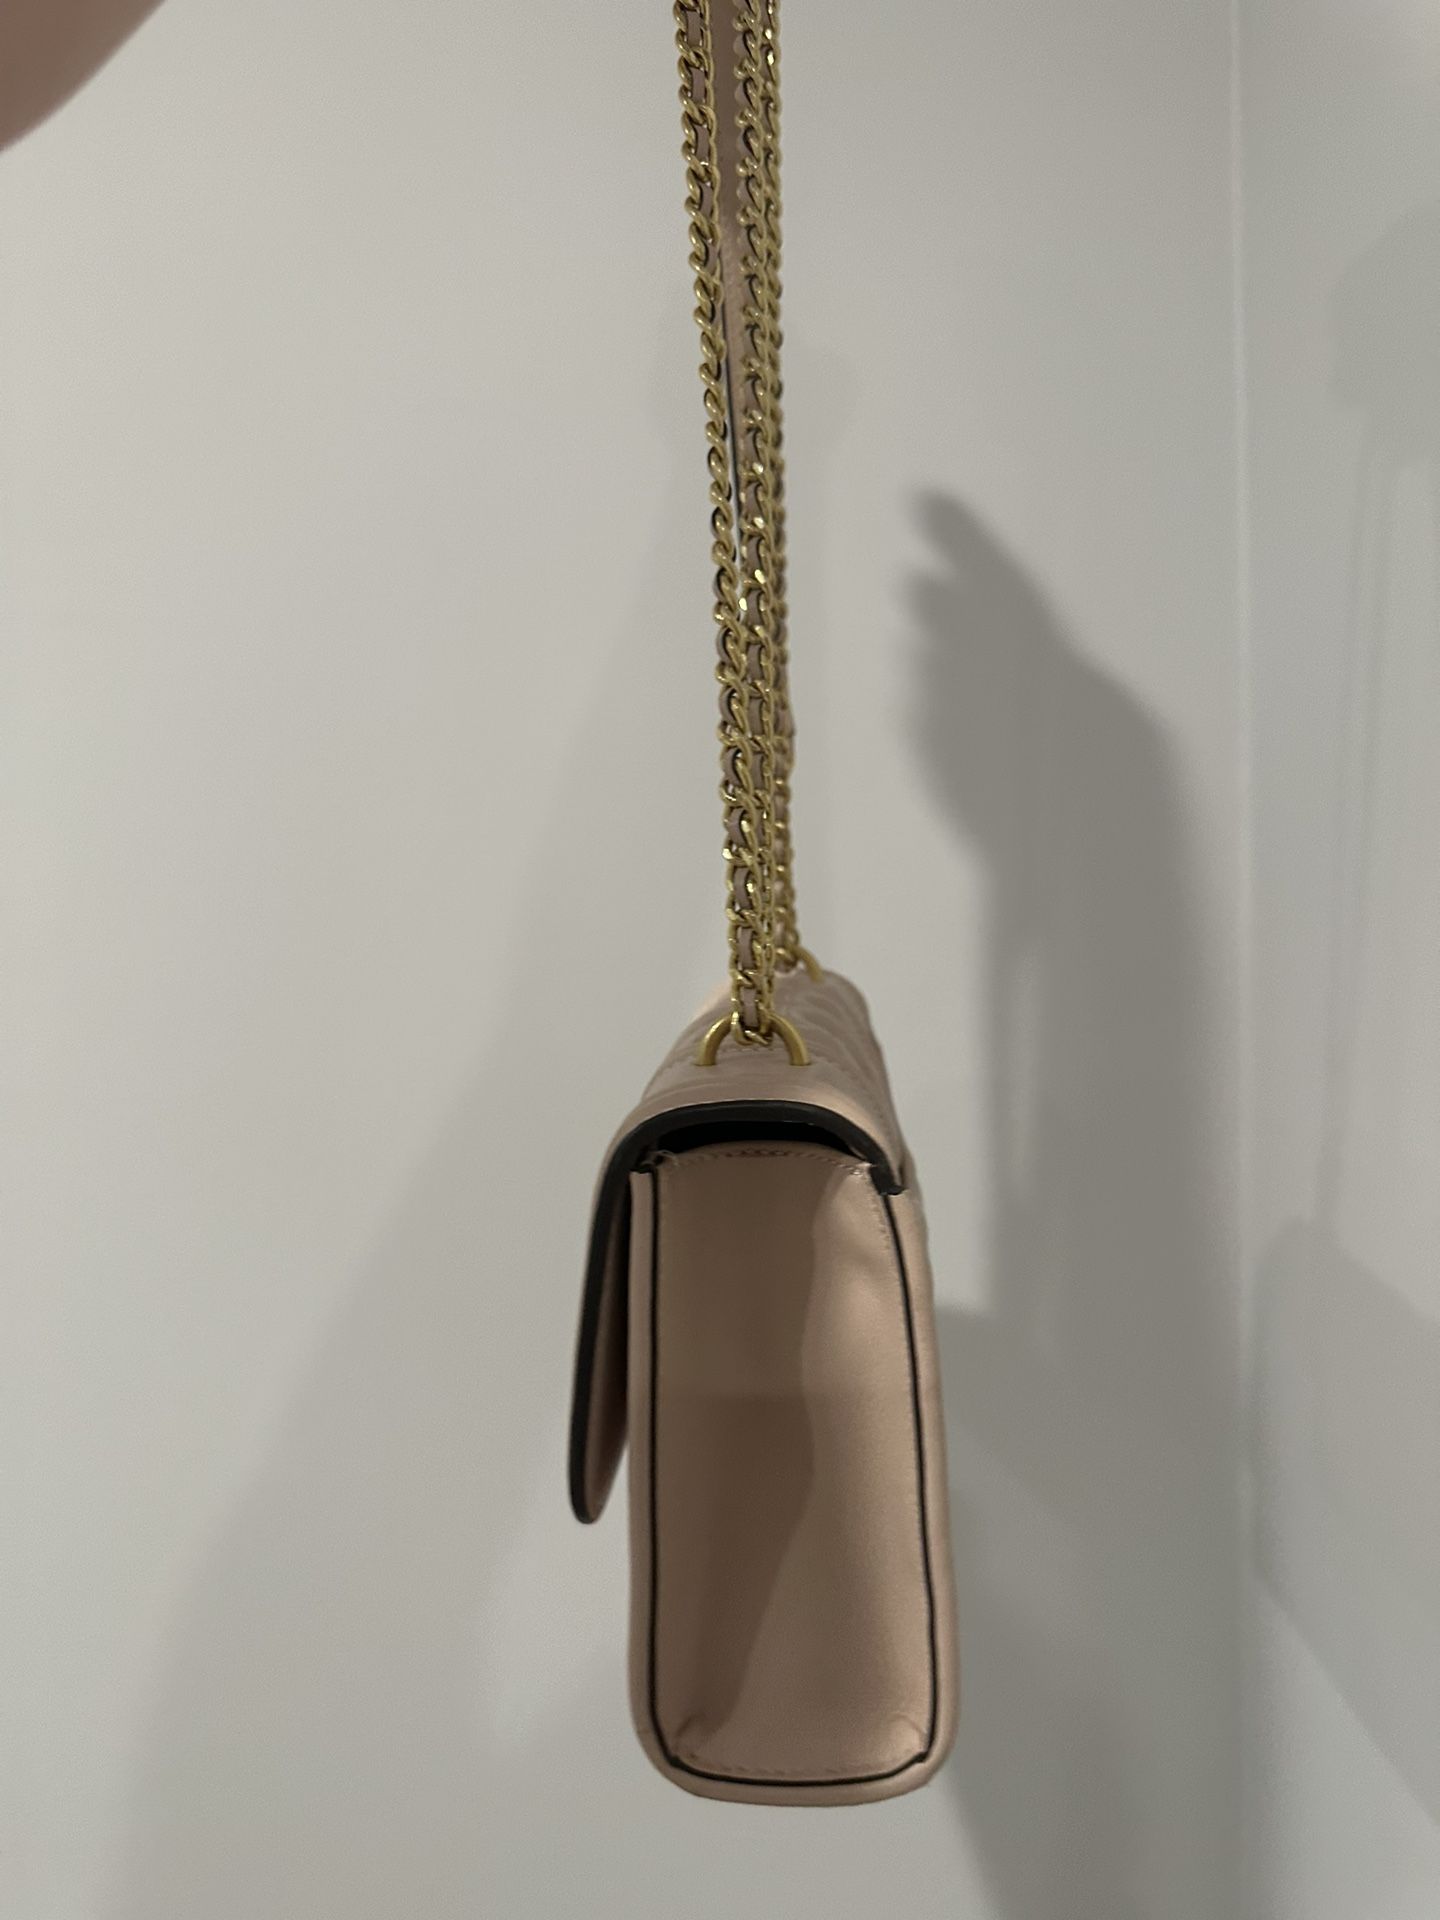 Tory Burch Fleming Small Convertible Shoulder bag for Sale in Burbank, CA -  OfferUp